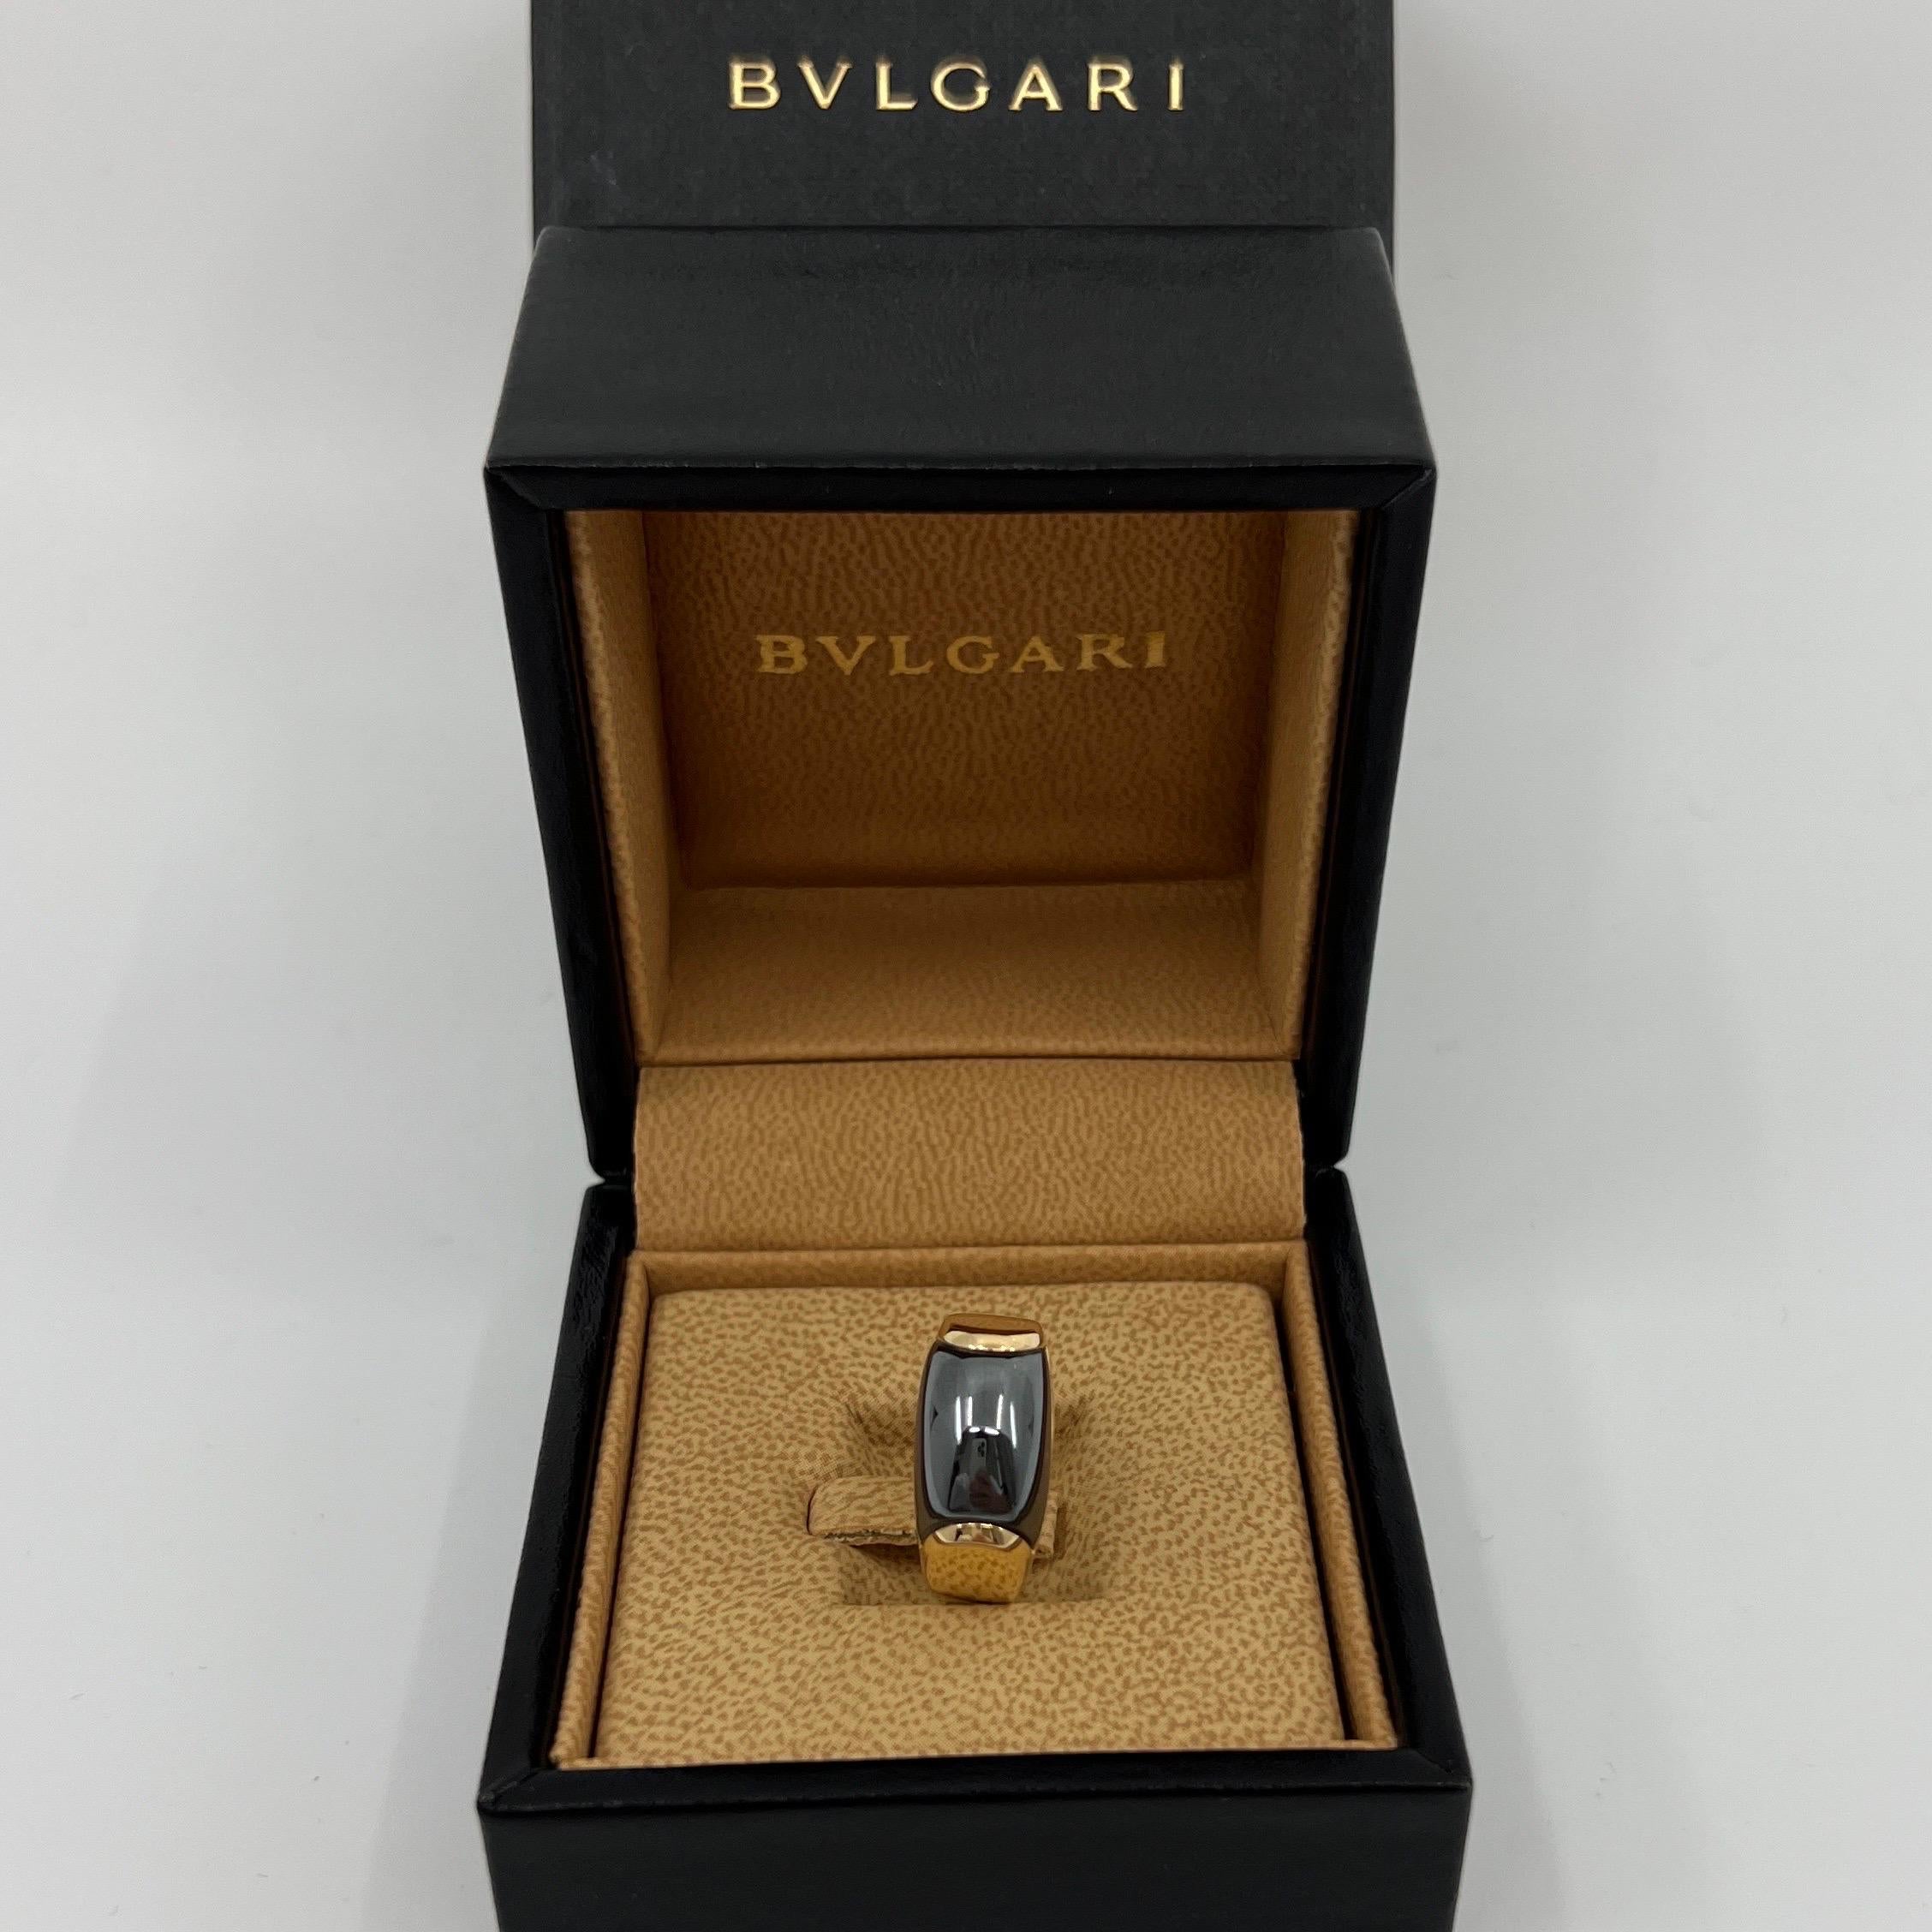 Vintage Bvlgari Hematite Tronchetto 18k Yellow Gold Ring.

Beautiful domed hematite set in a fine 18k yellow gold tension set ring.

In excellent condition, has been professionally polished and cleaned.

Ring size UK L - US 6 - EU 51.5 

Comes with